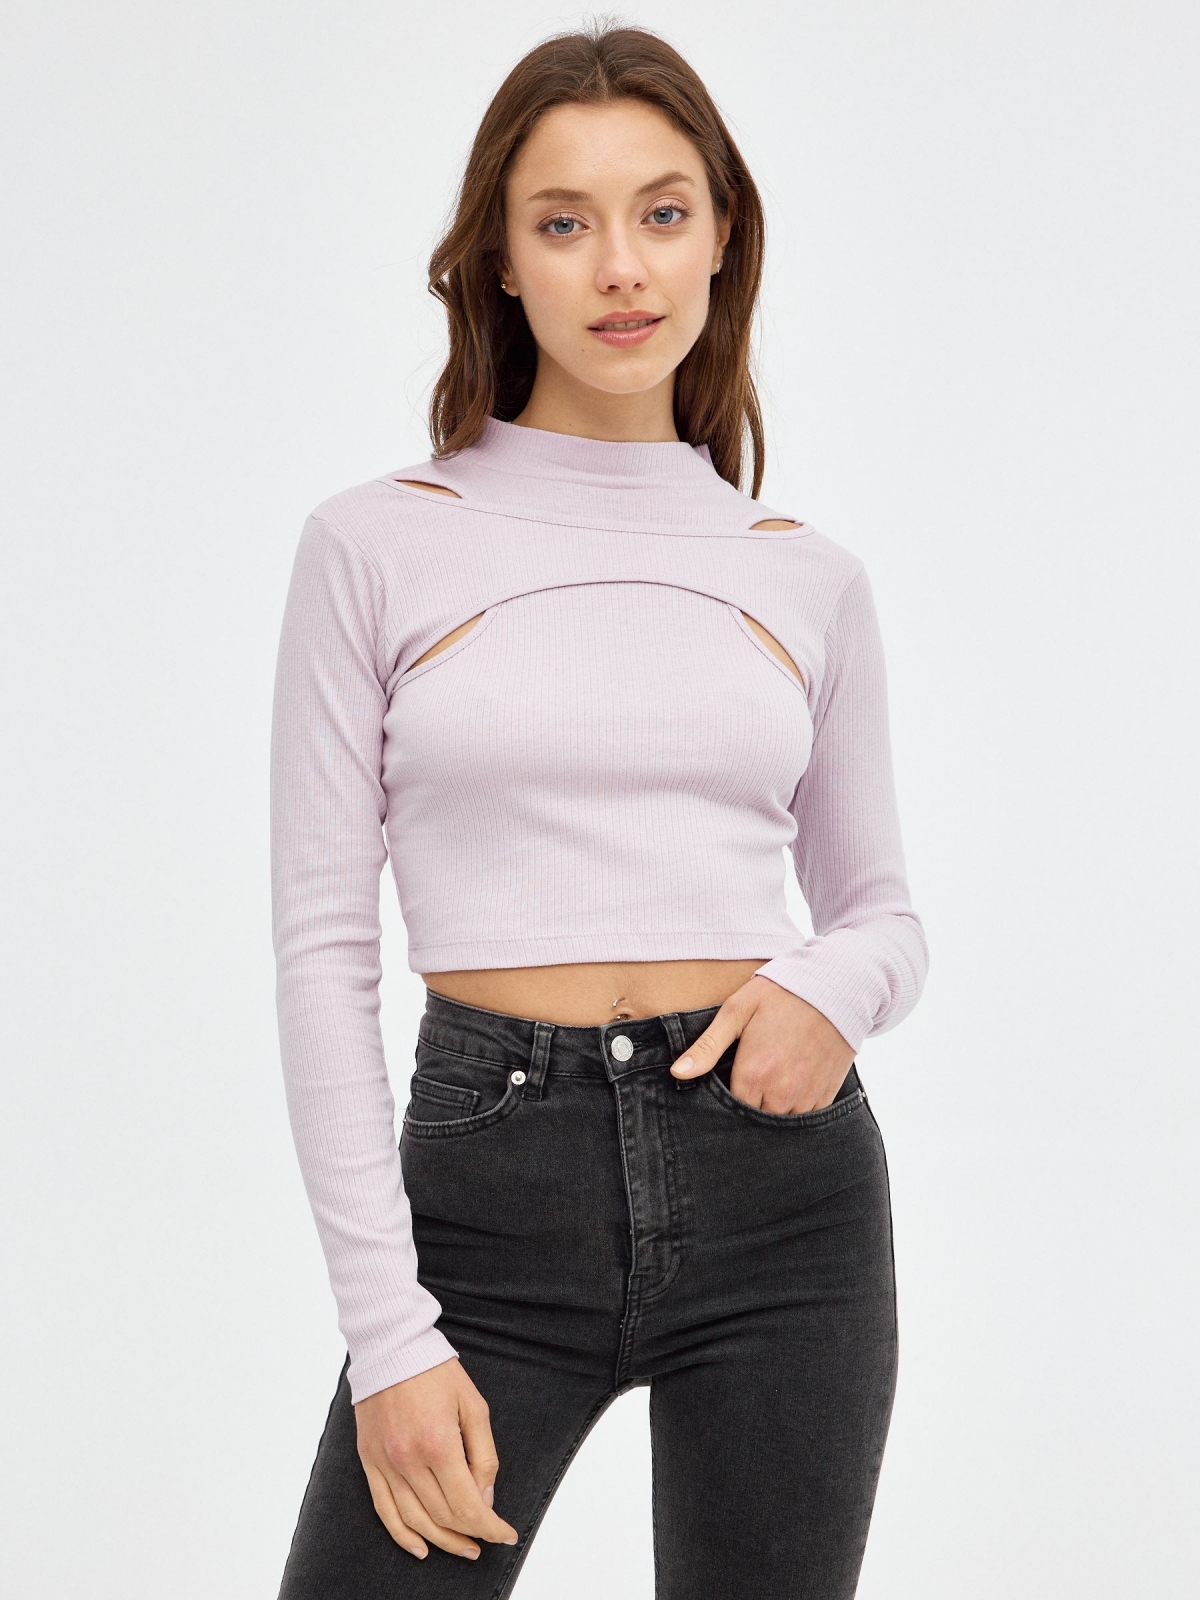 Tight crop cut out t-shirt mauve middle front view